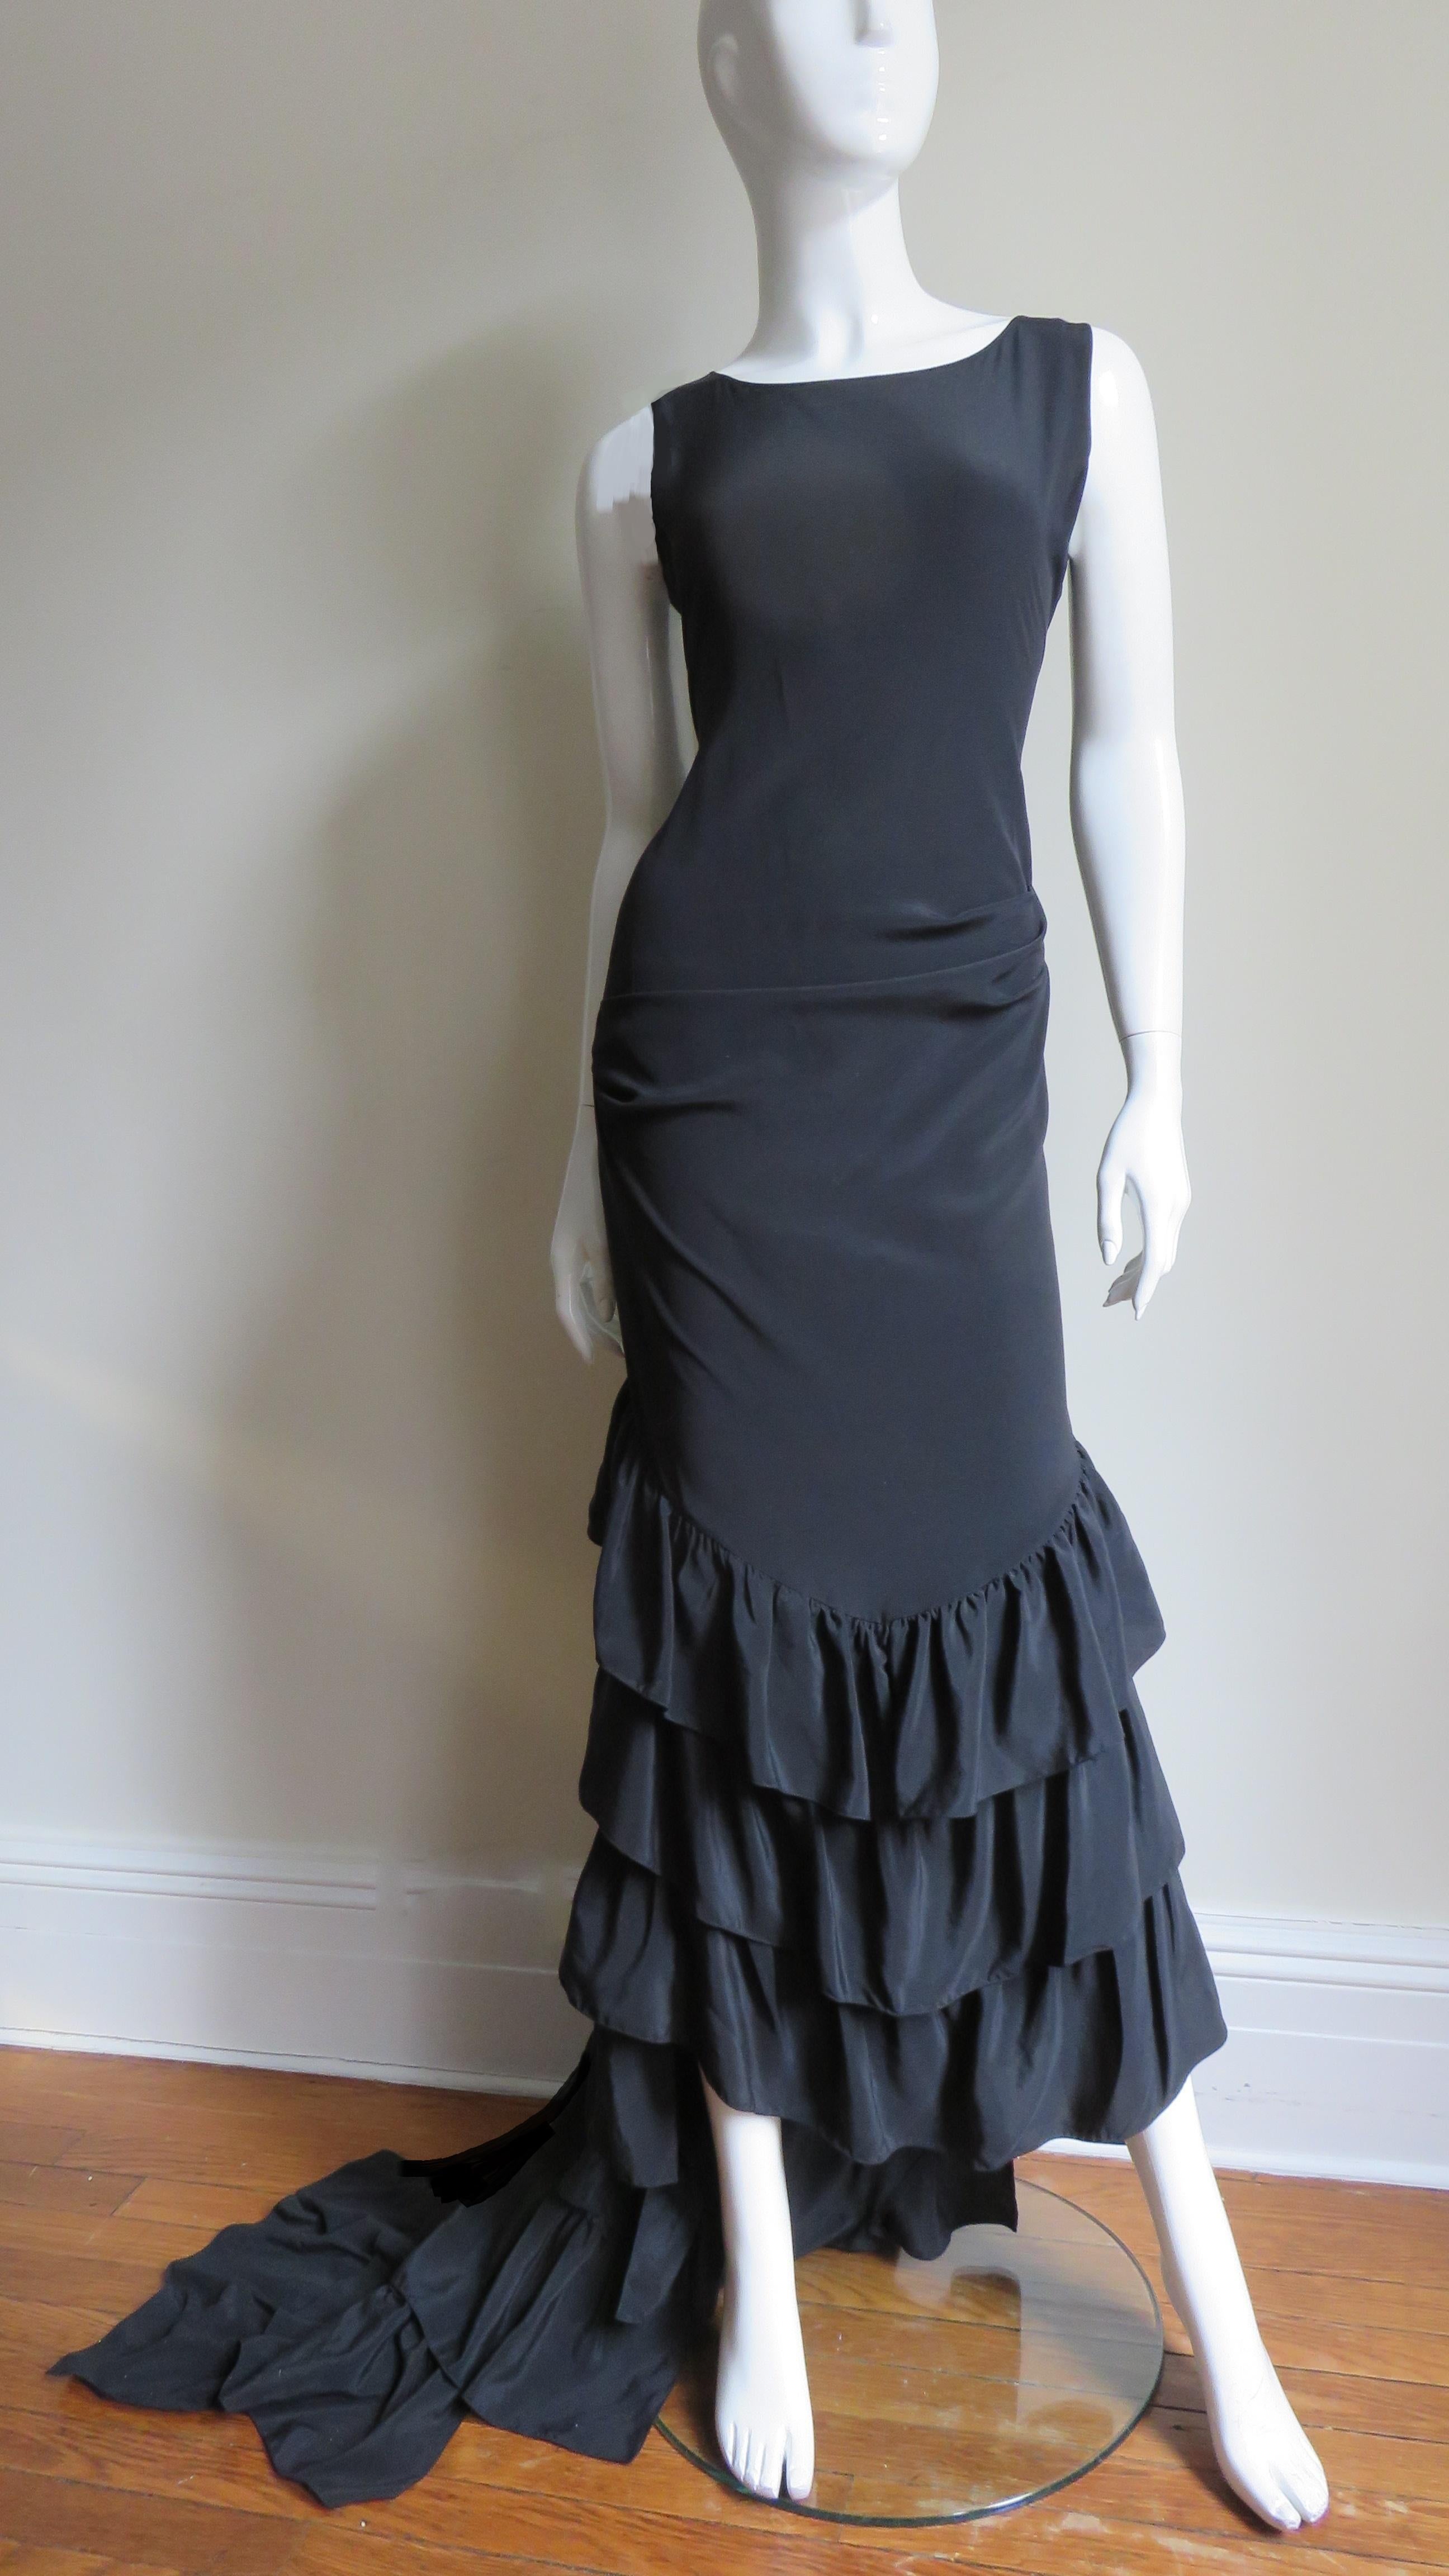 Alexander McQueen New Silk Dress with Ruffle Hem S/S 1999 In Excellent Condition For Sale In Water Mill, NY